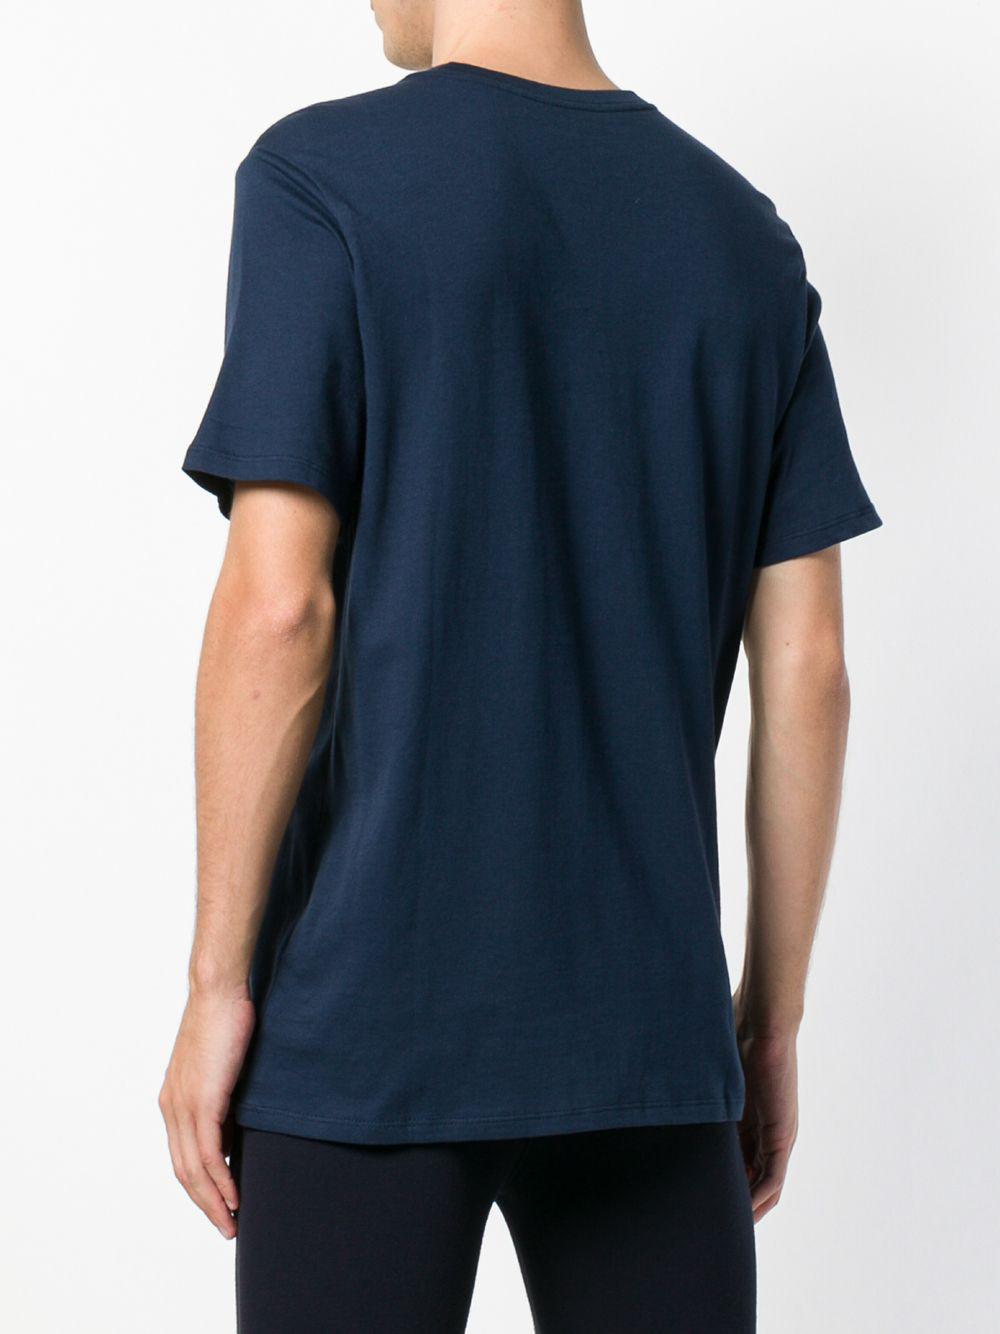 Lyst - Nike Just Do It T-shirt in Blue for Men